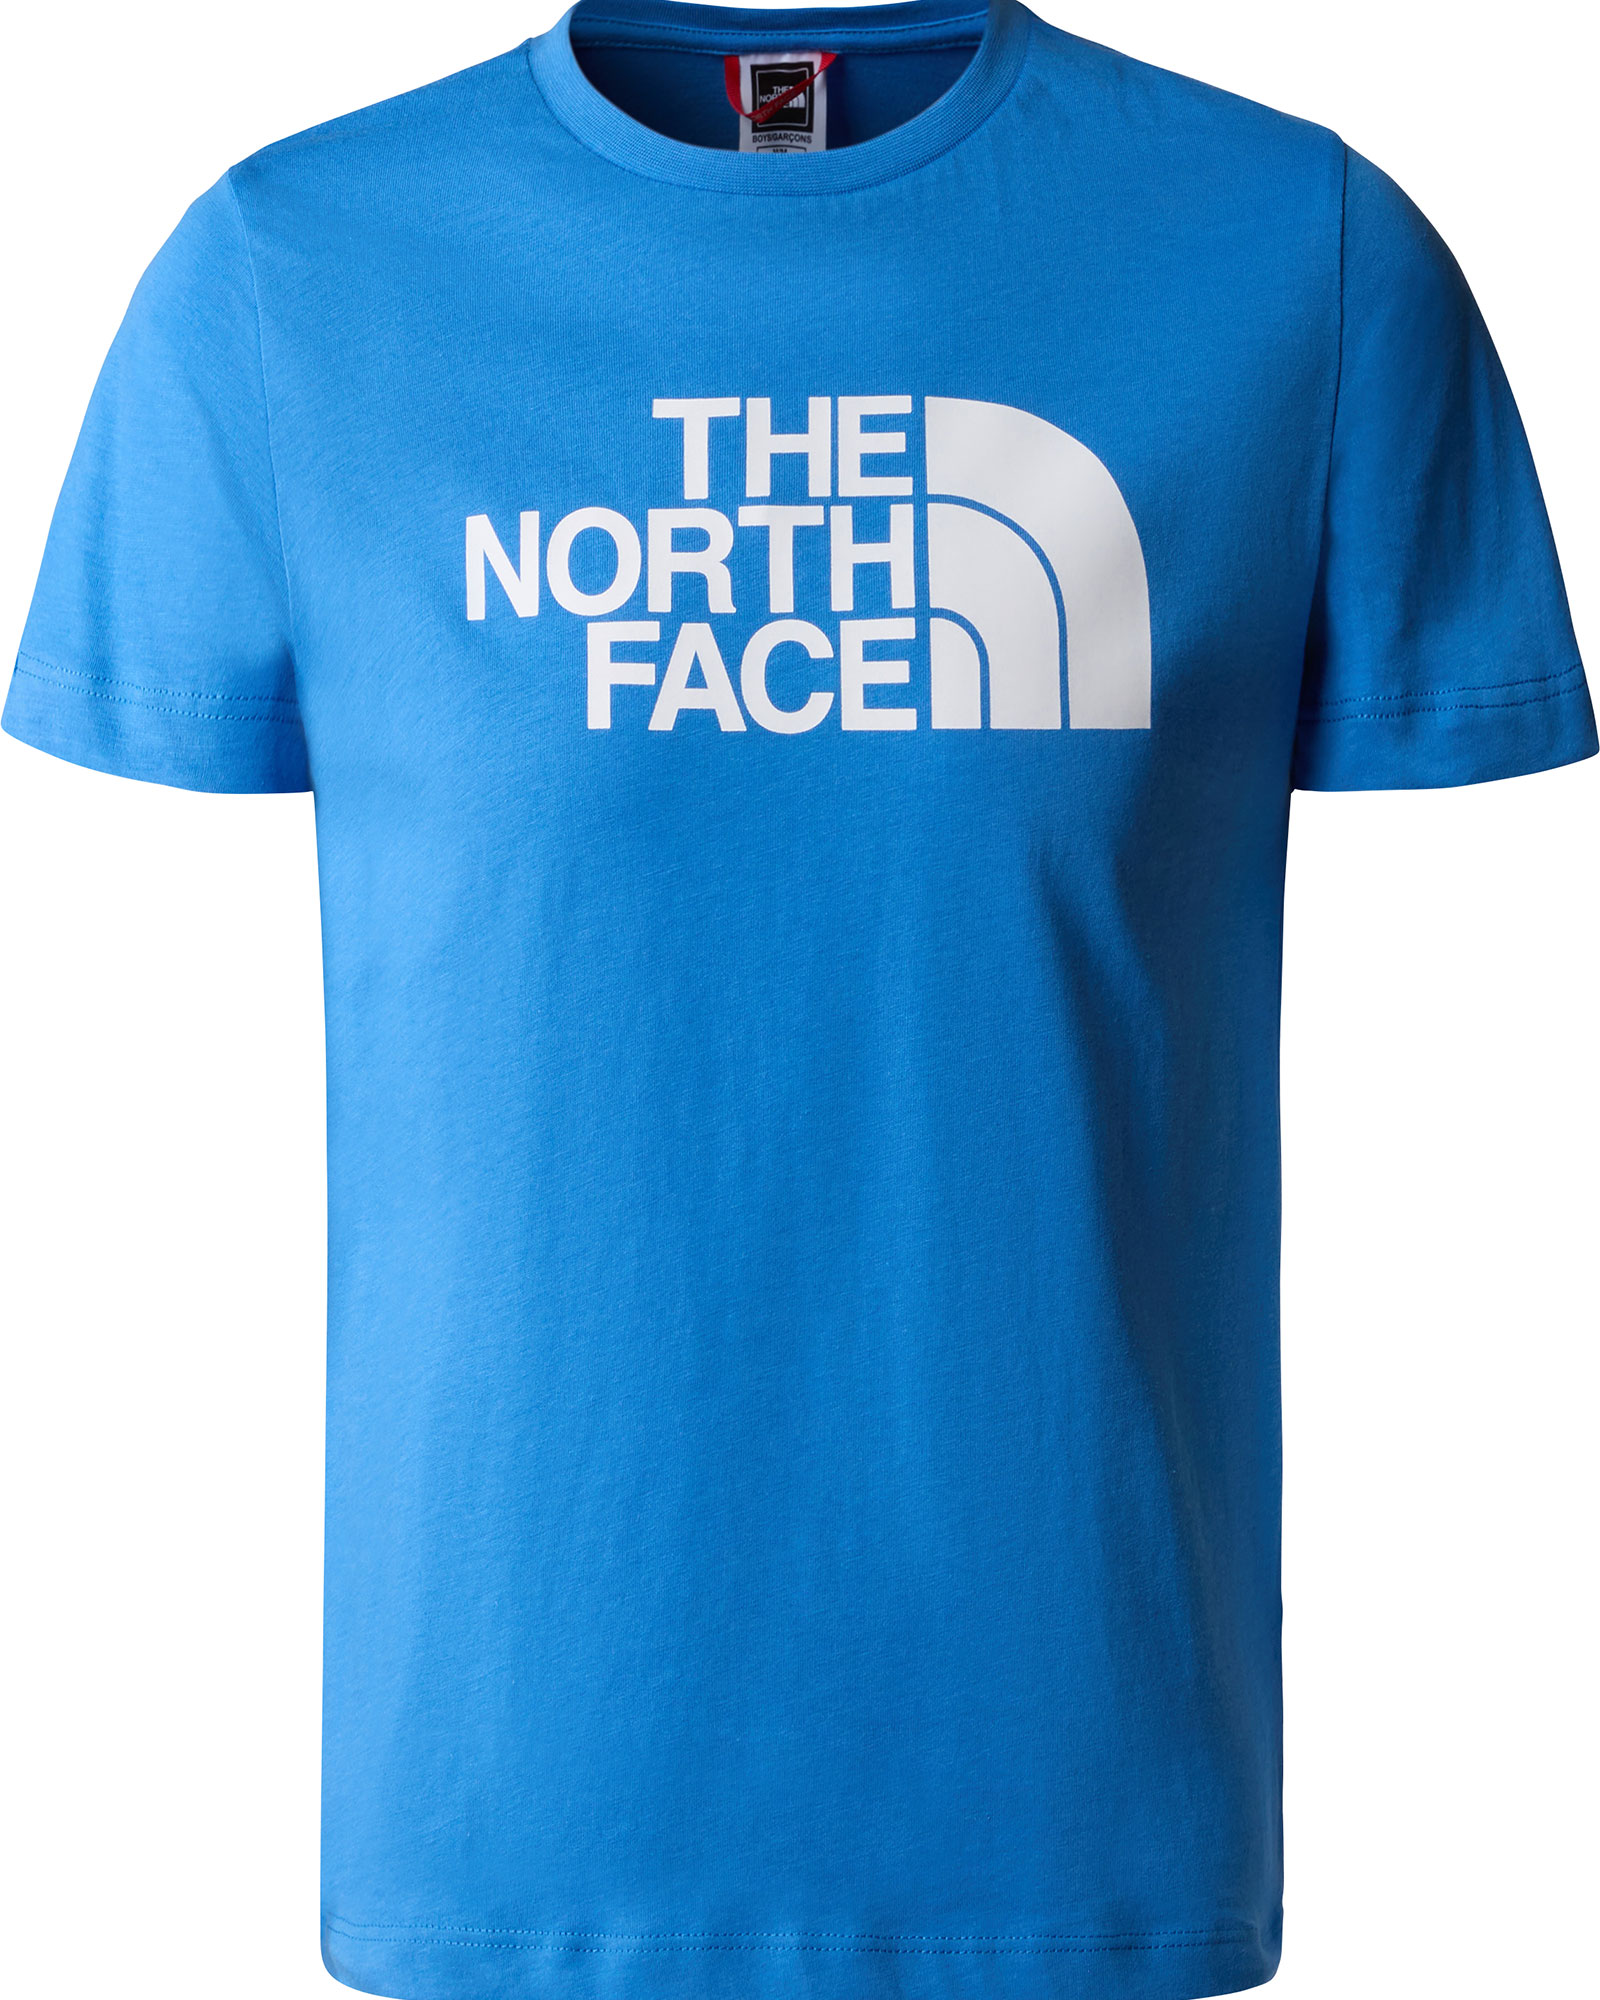 The North Face Boys Easy T-shirt Xl